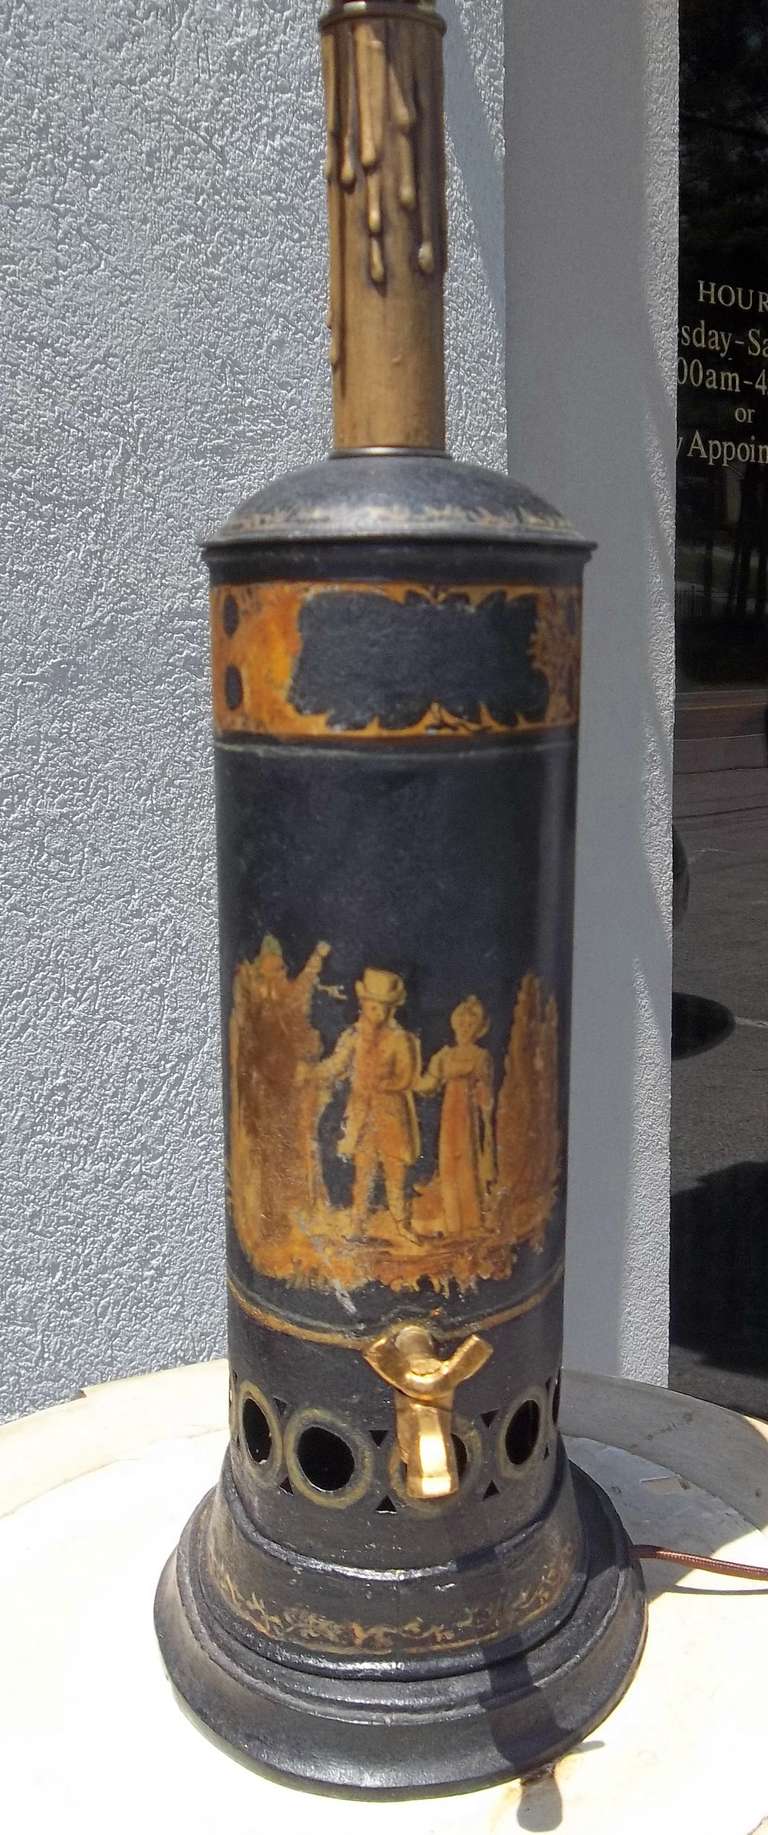 A tole hot water (or other beverage ) urn with the original basket for insertin charcoal to keep liquid hot . Gilt decorated .Judging by the couple's dress 
the urn probably dates to around 1830 ....

Of course nicks , paint loss , gilt loss and